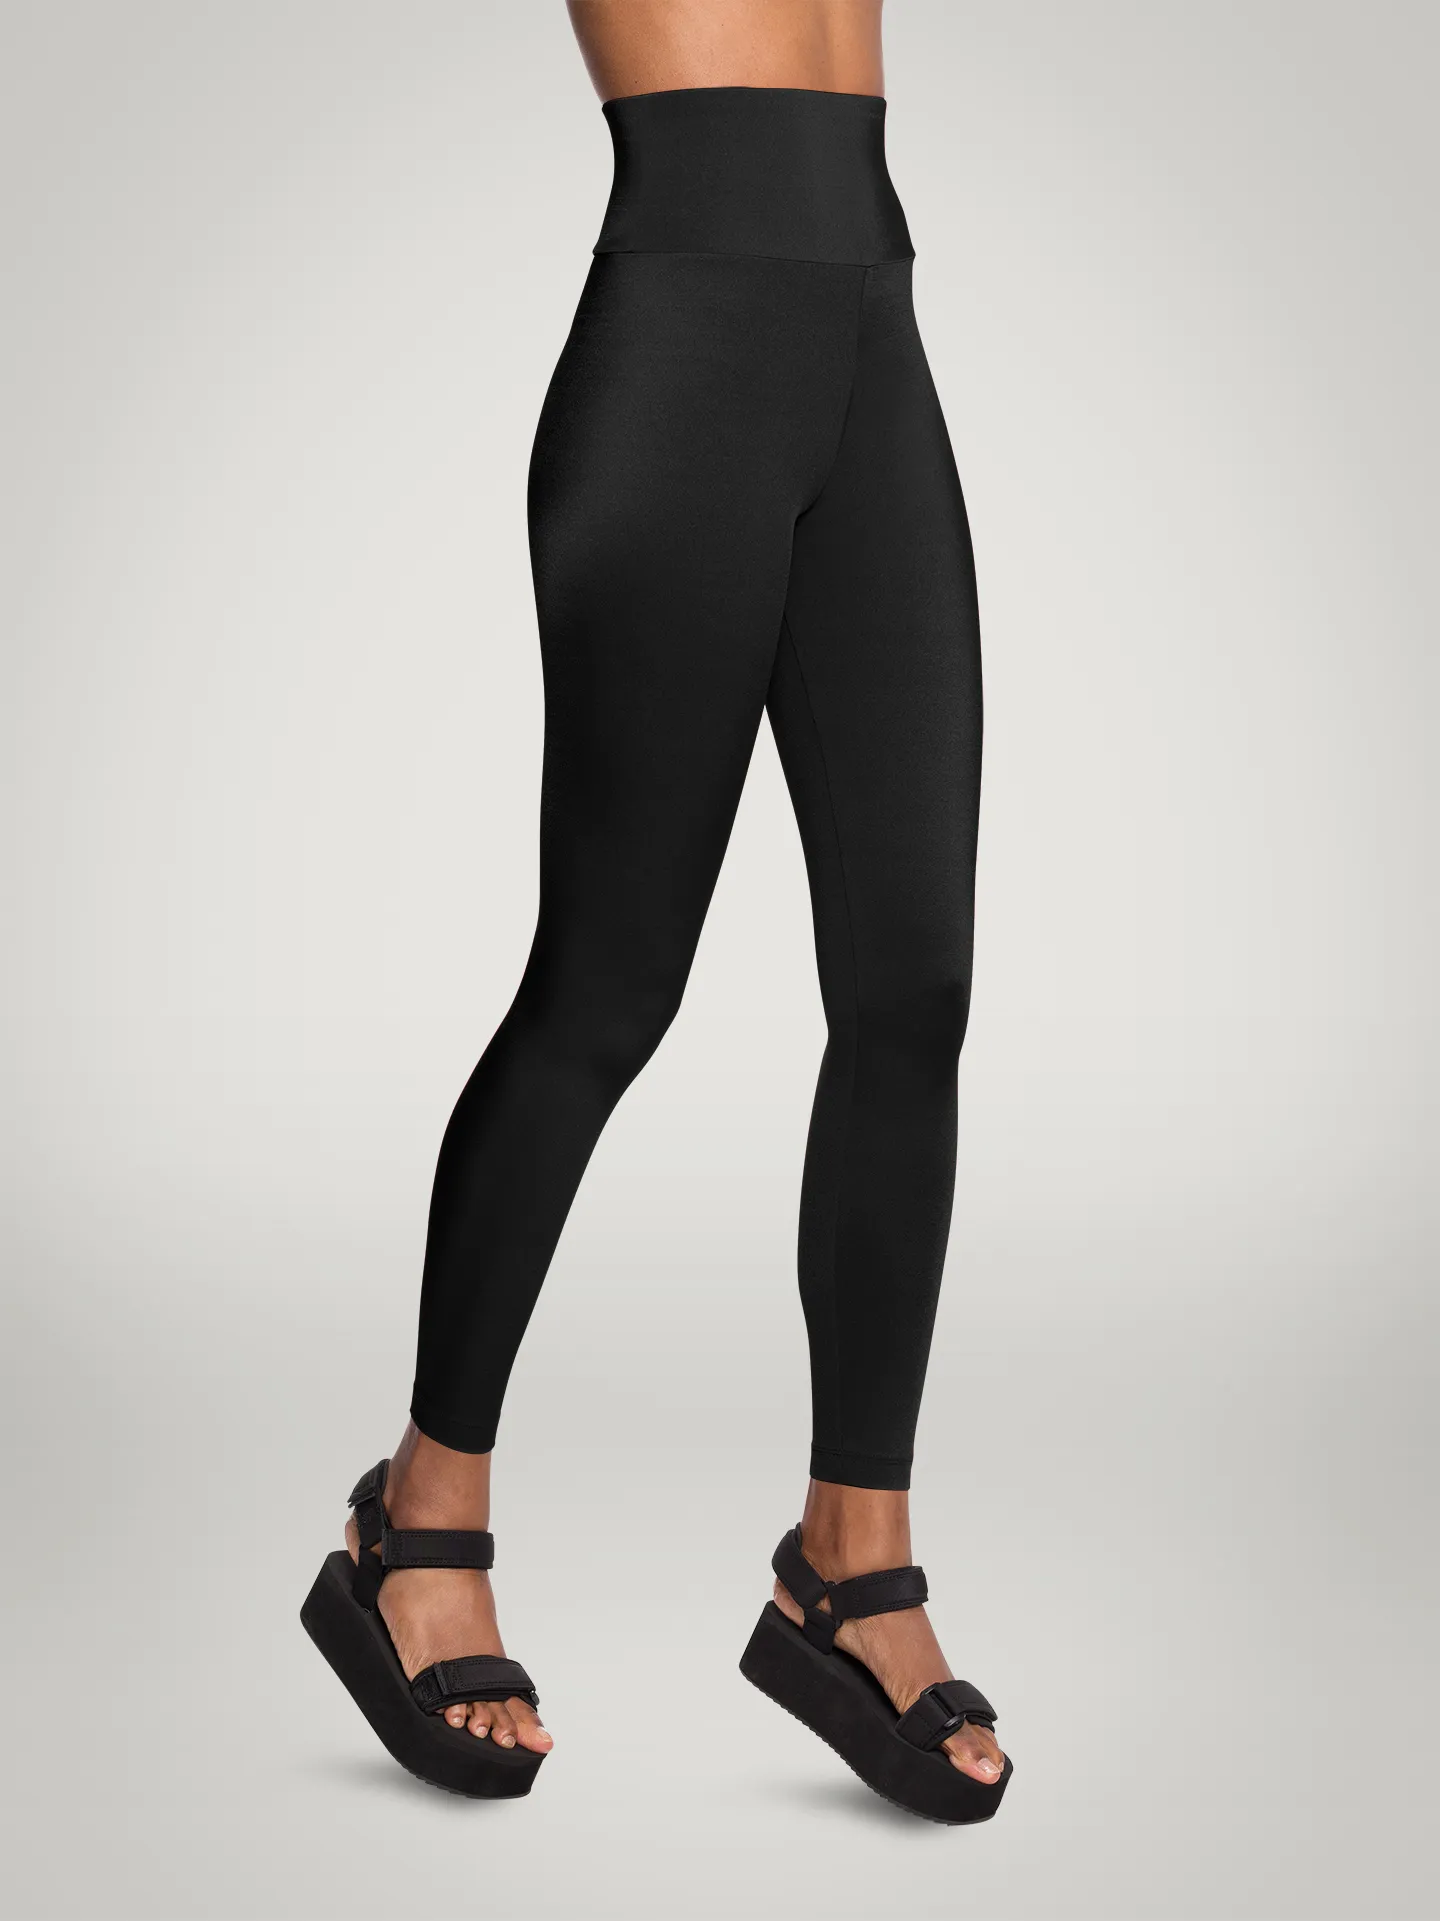 Wolford - The Workout Leggings, Donna, black, Taglia: S